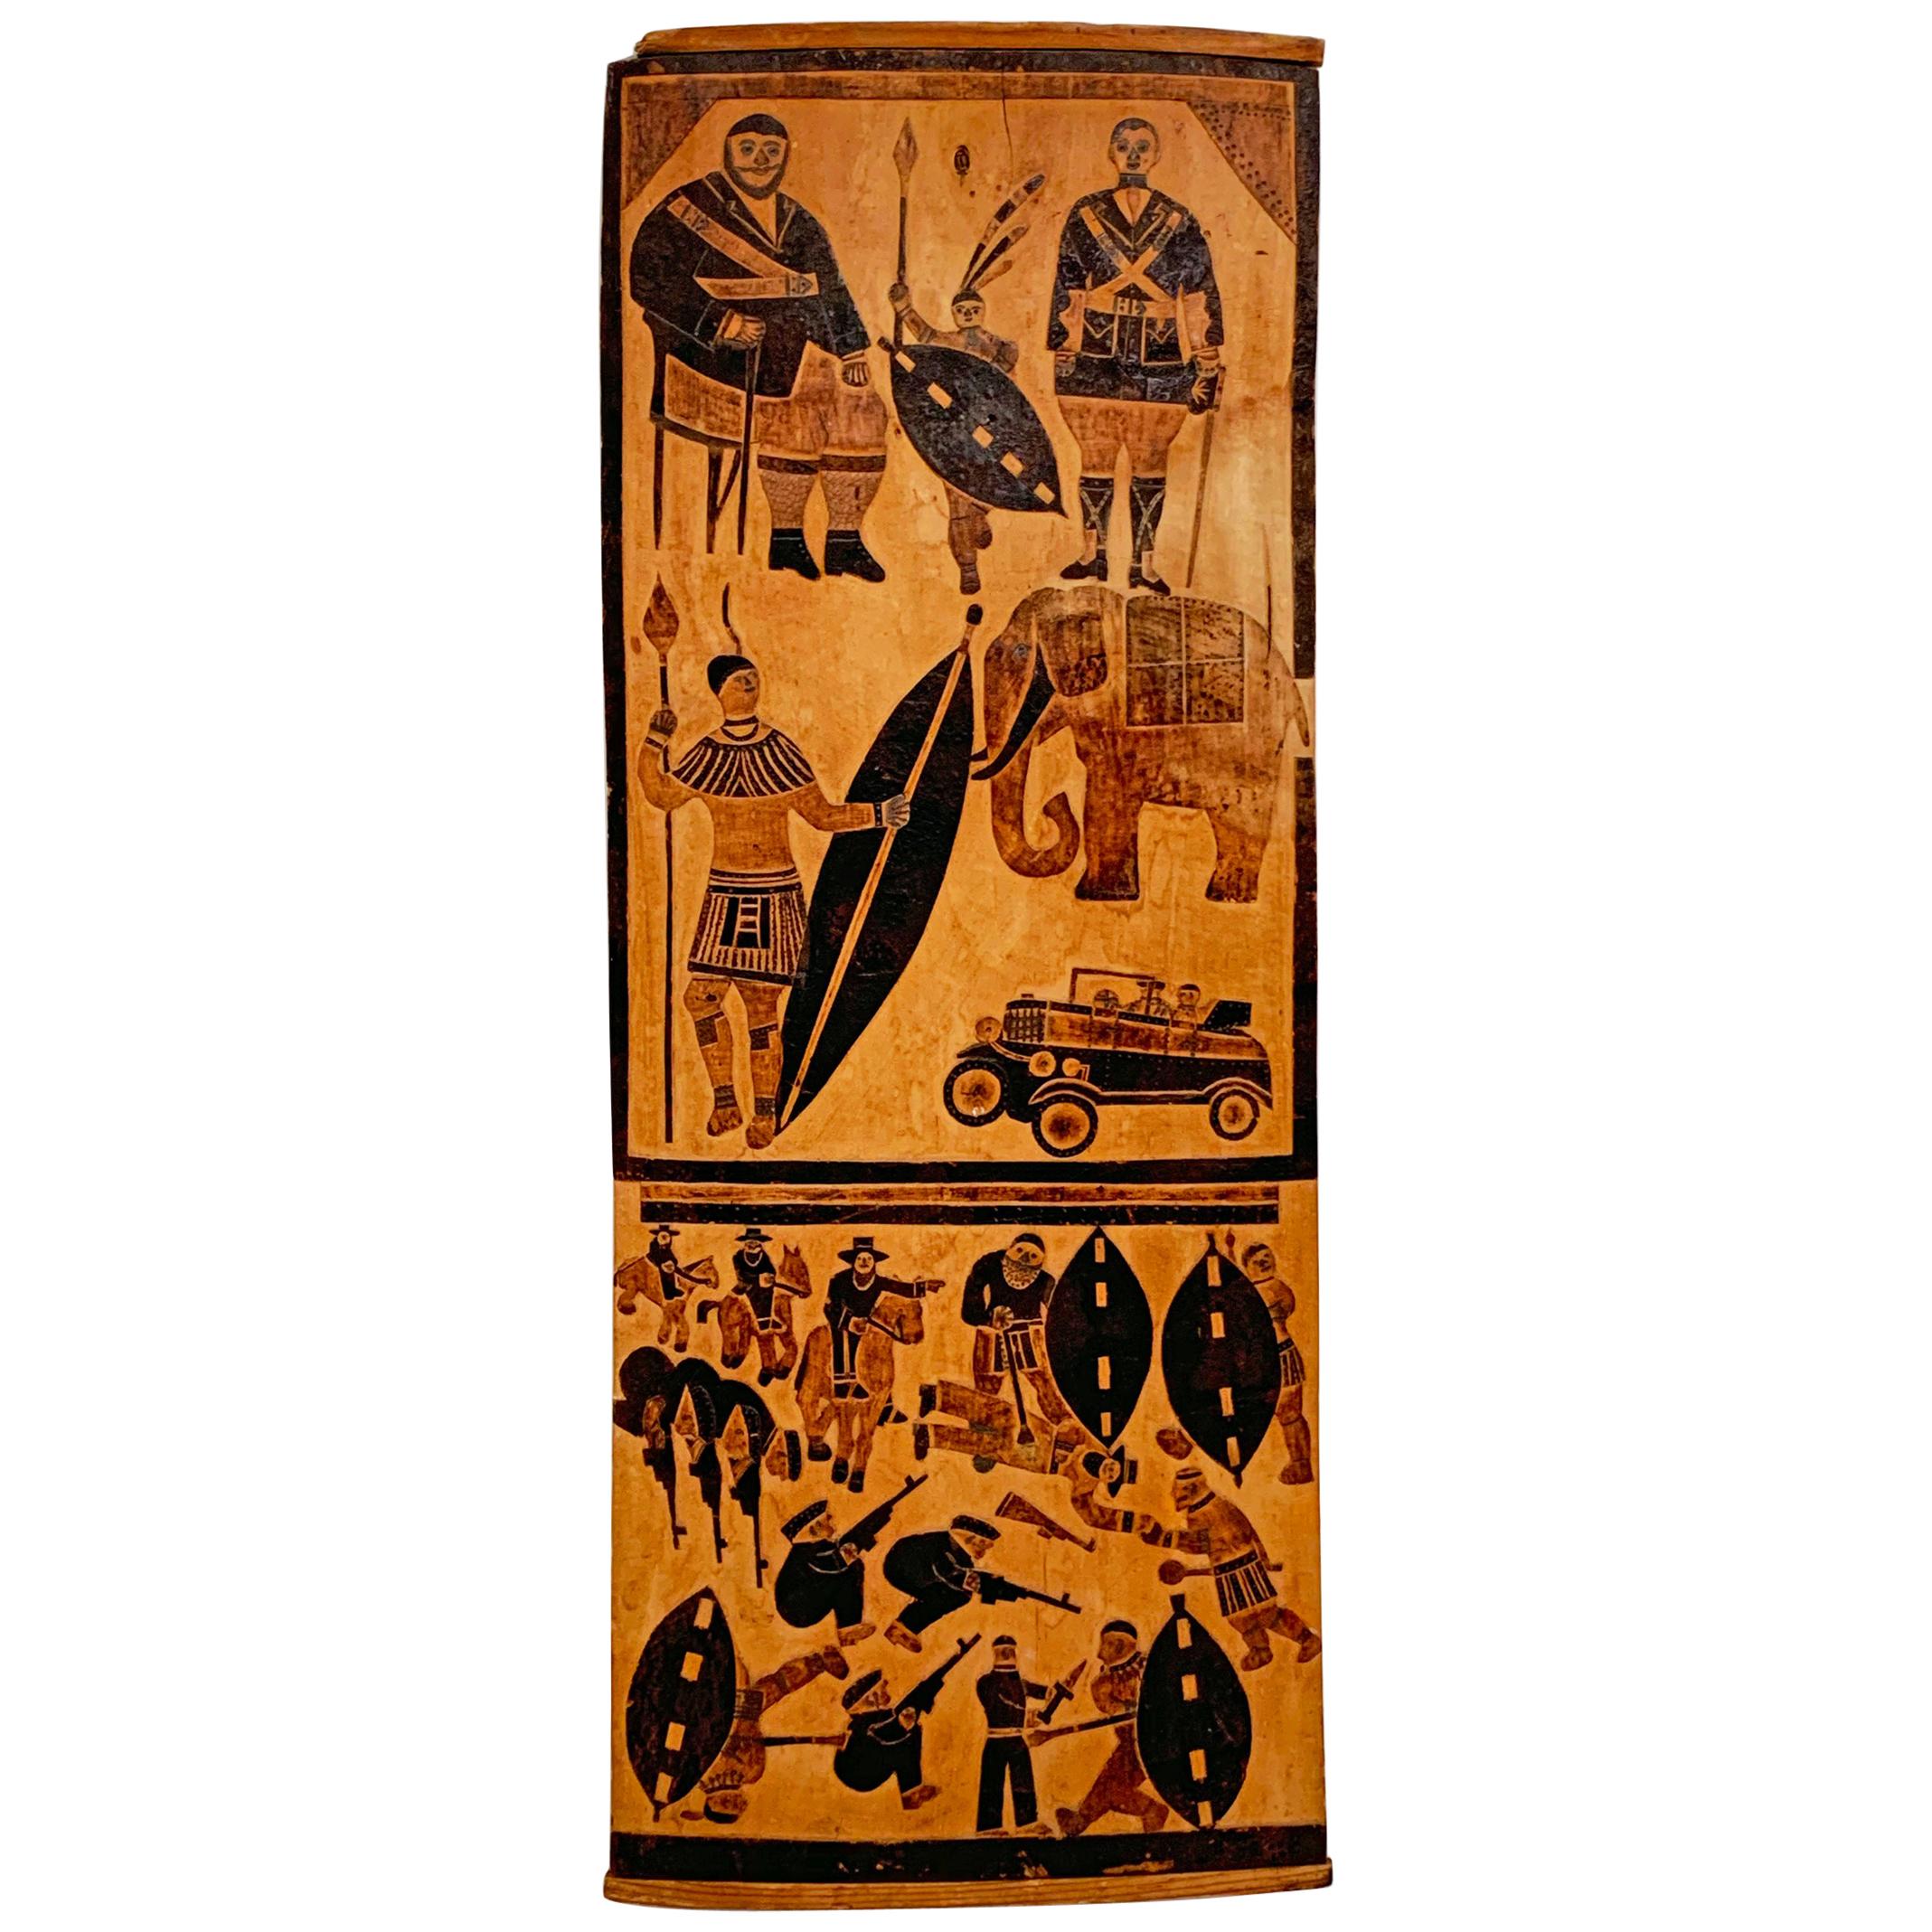 Rare South African Folk Art Carved Storyboard Panel, circa 1930s